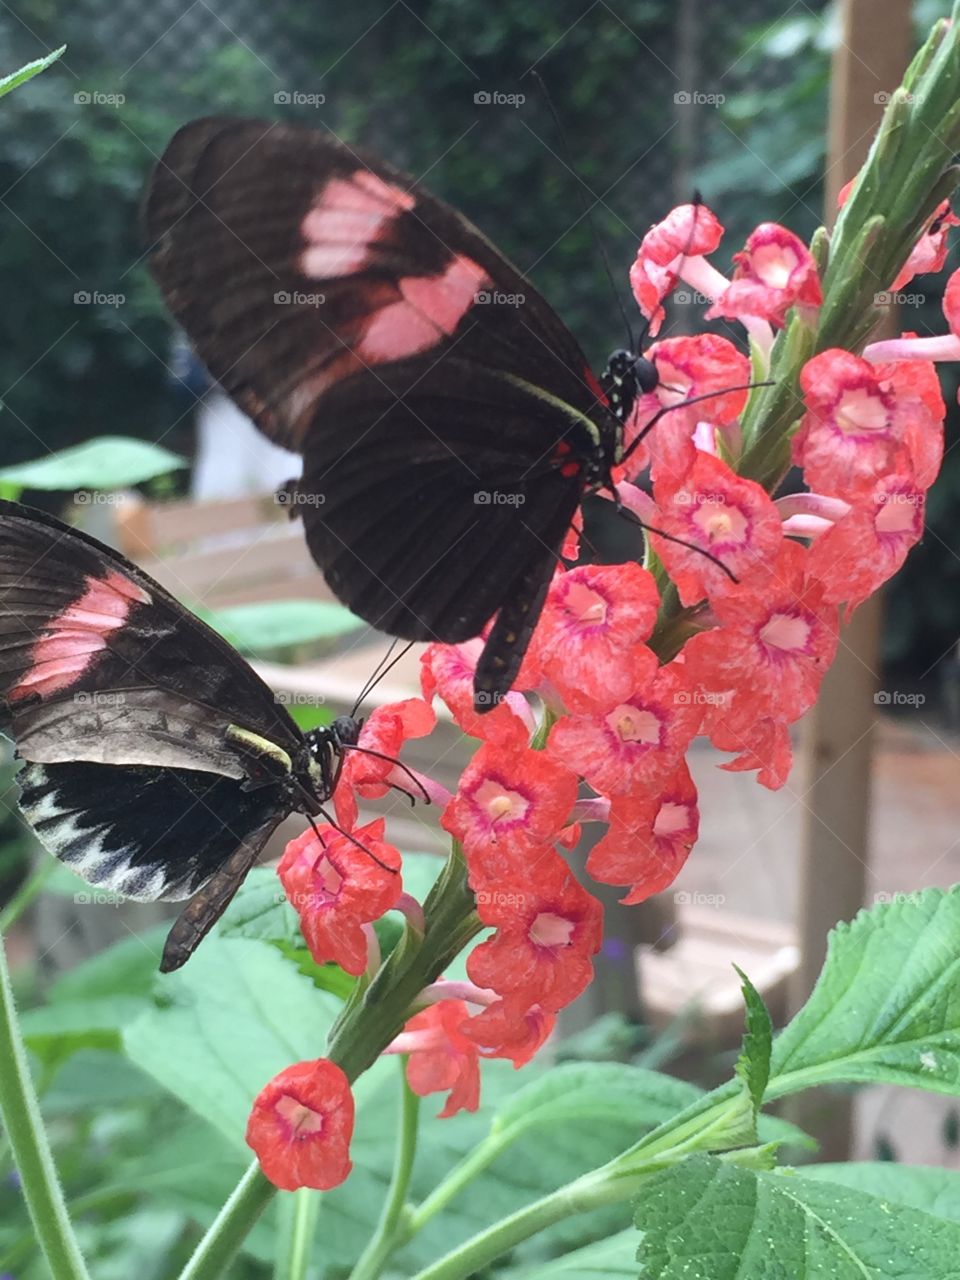 Sioux Falls Butterfly House, Sioux Falls, SD